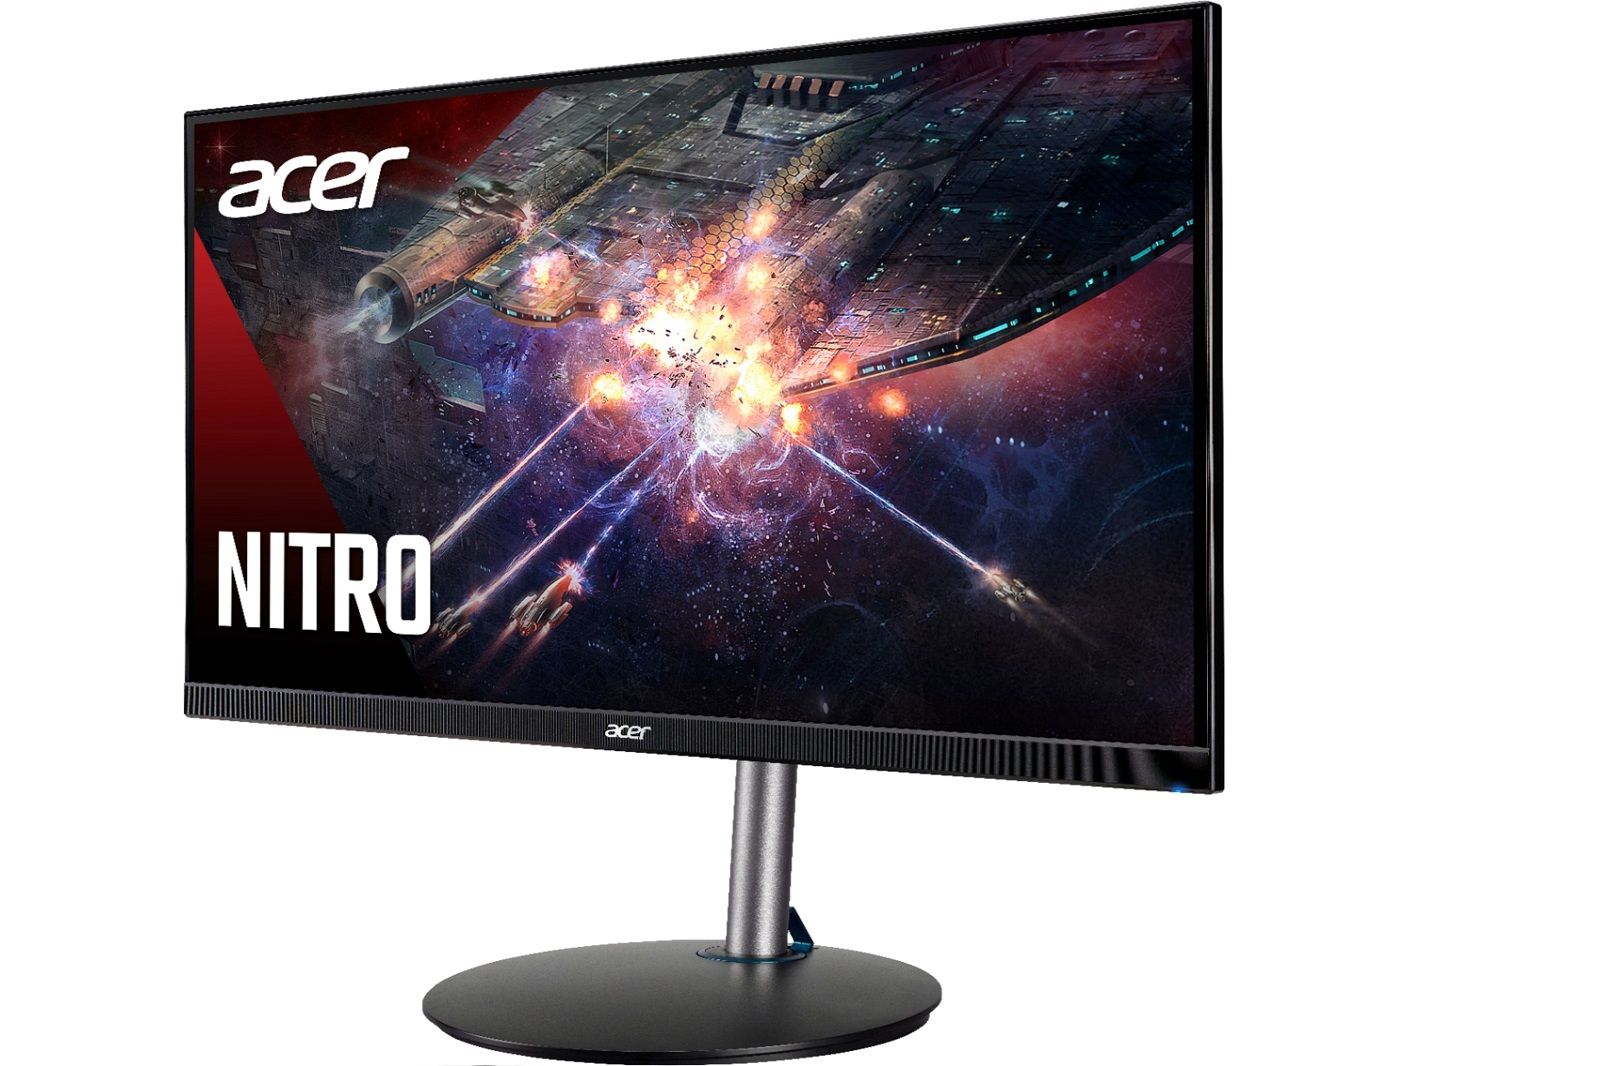 This Acer Nitro 27-inch monitor is now just photo 1